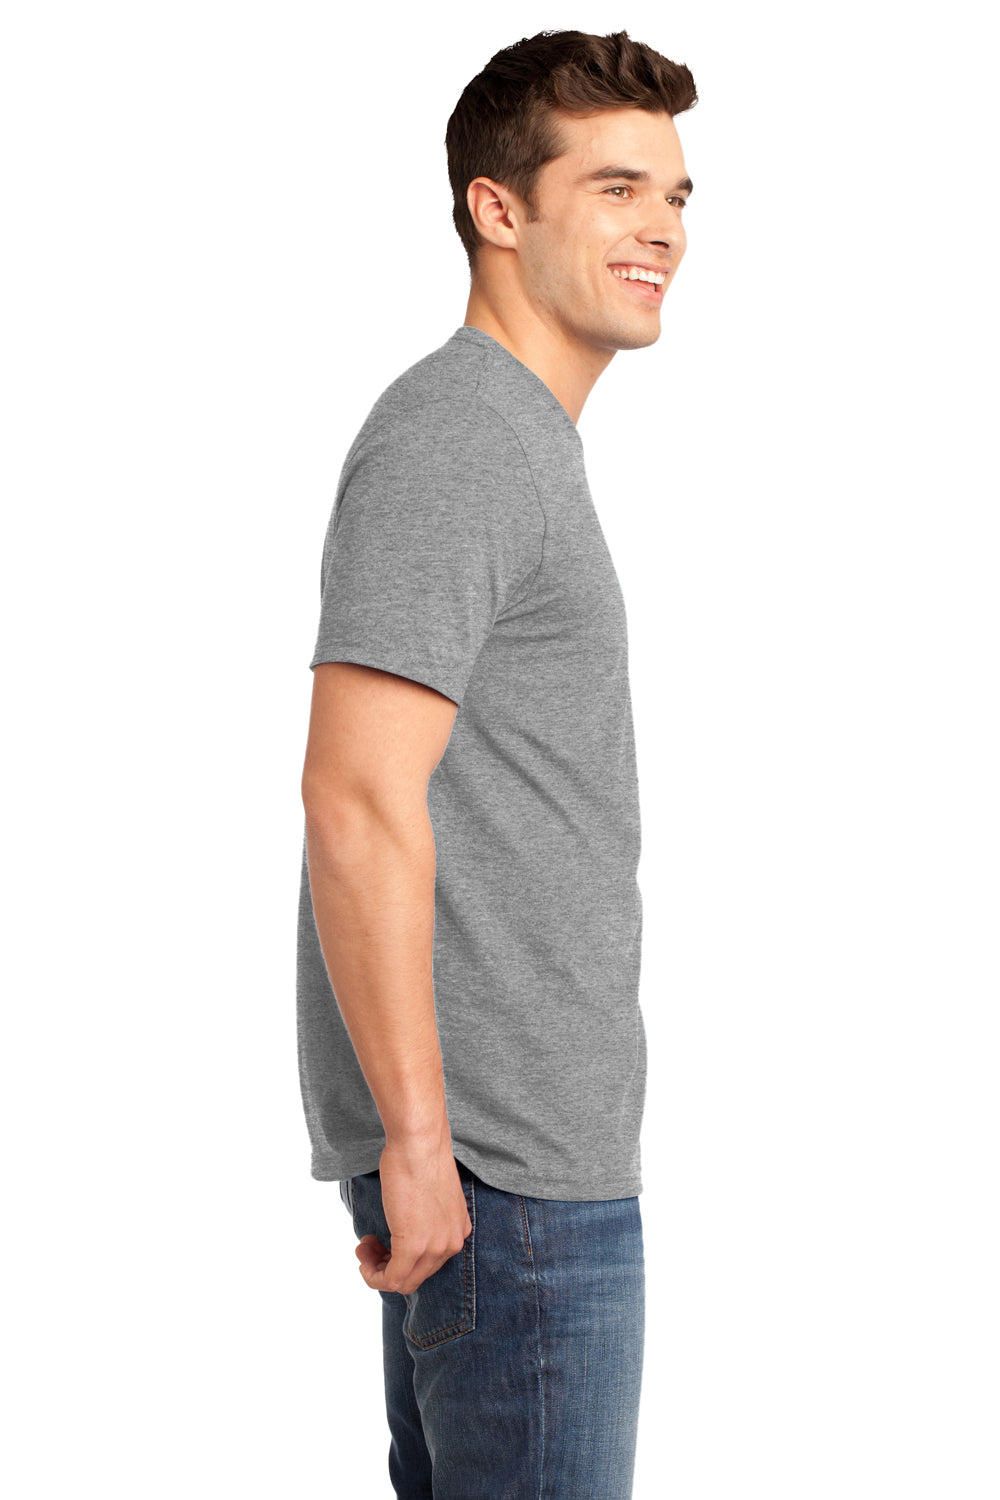 District DT6000 Mens Very Important Short Sleeve Crewneck T-Shirt Grey Frost Side